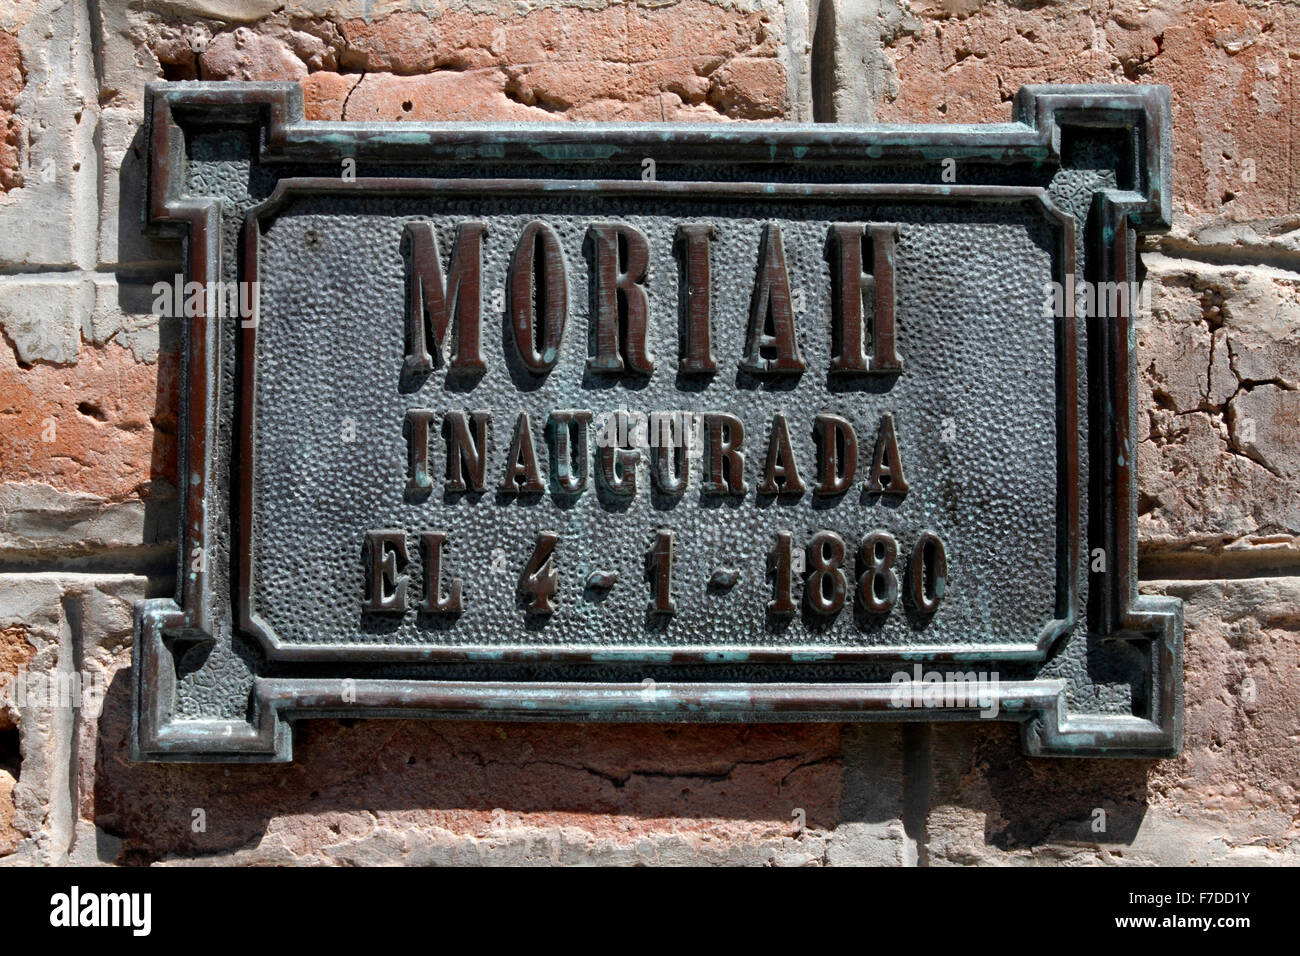 Plaque on the wall of Moriah Chapel with a visitor entering the chapel, Trelew, Chubut, Patagonia Argentina Stock Photo